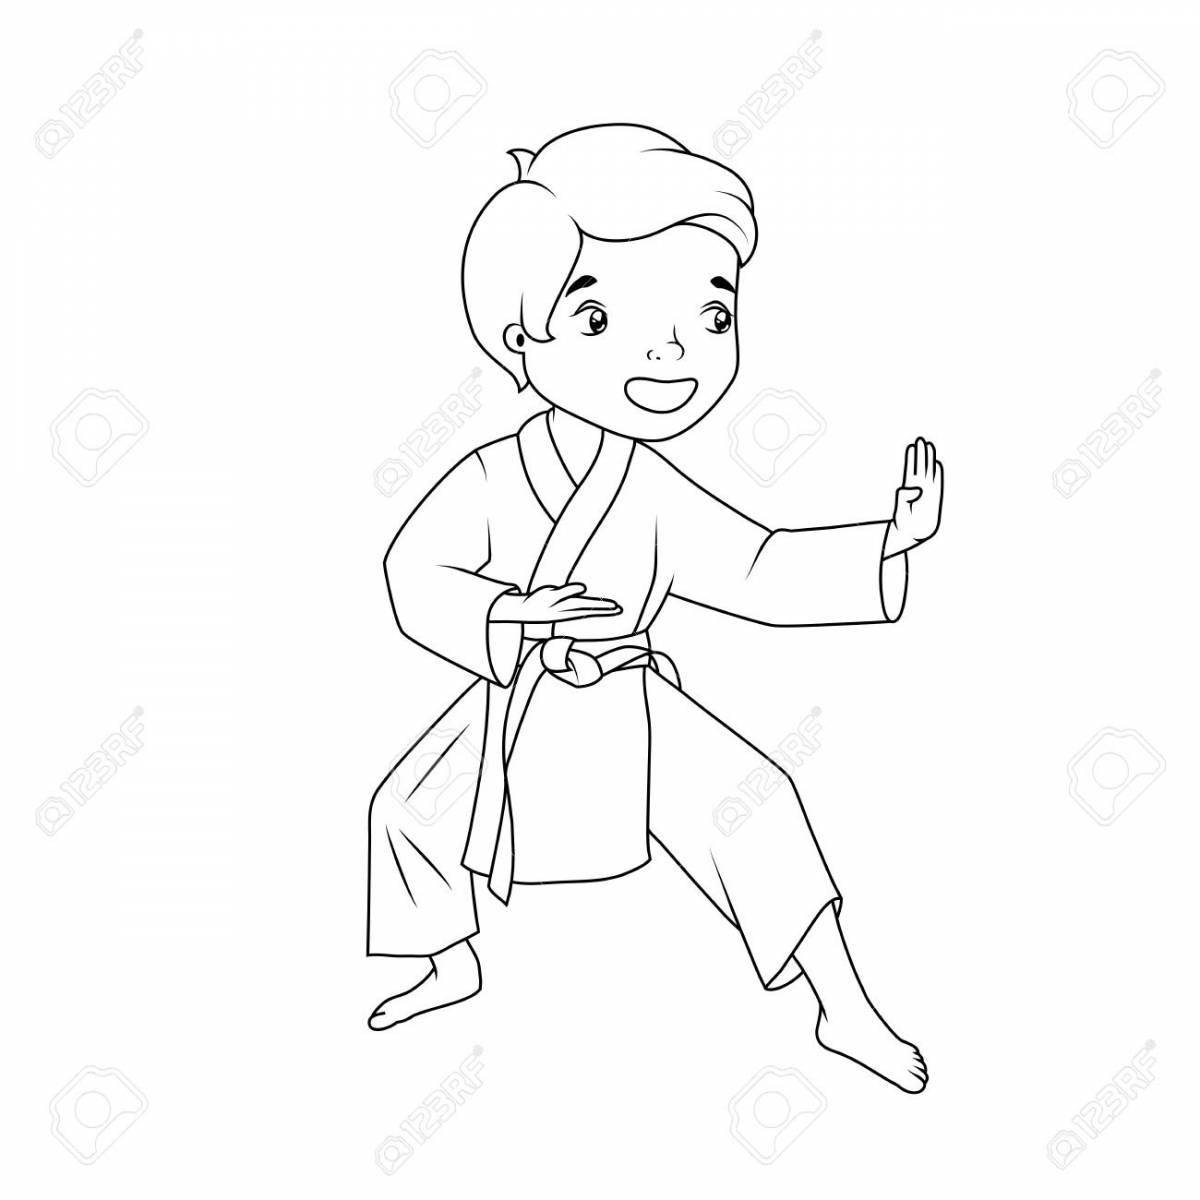 Animated karate coloring book for kids